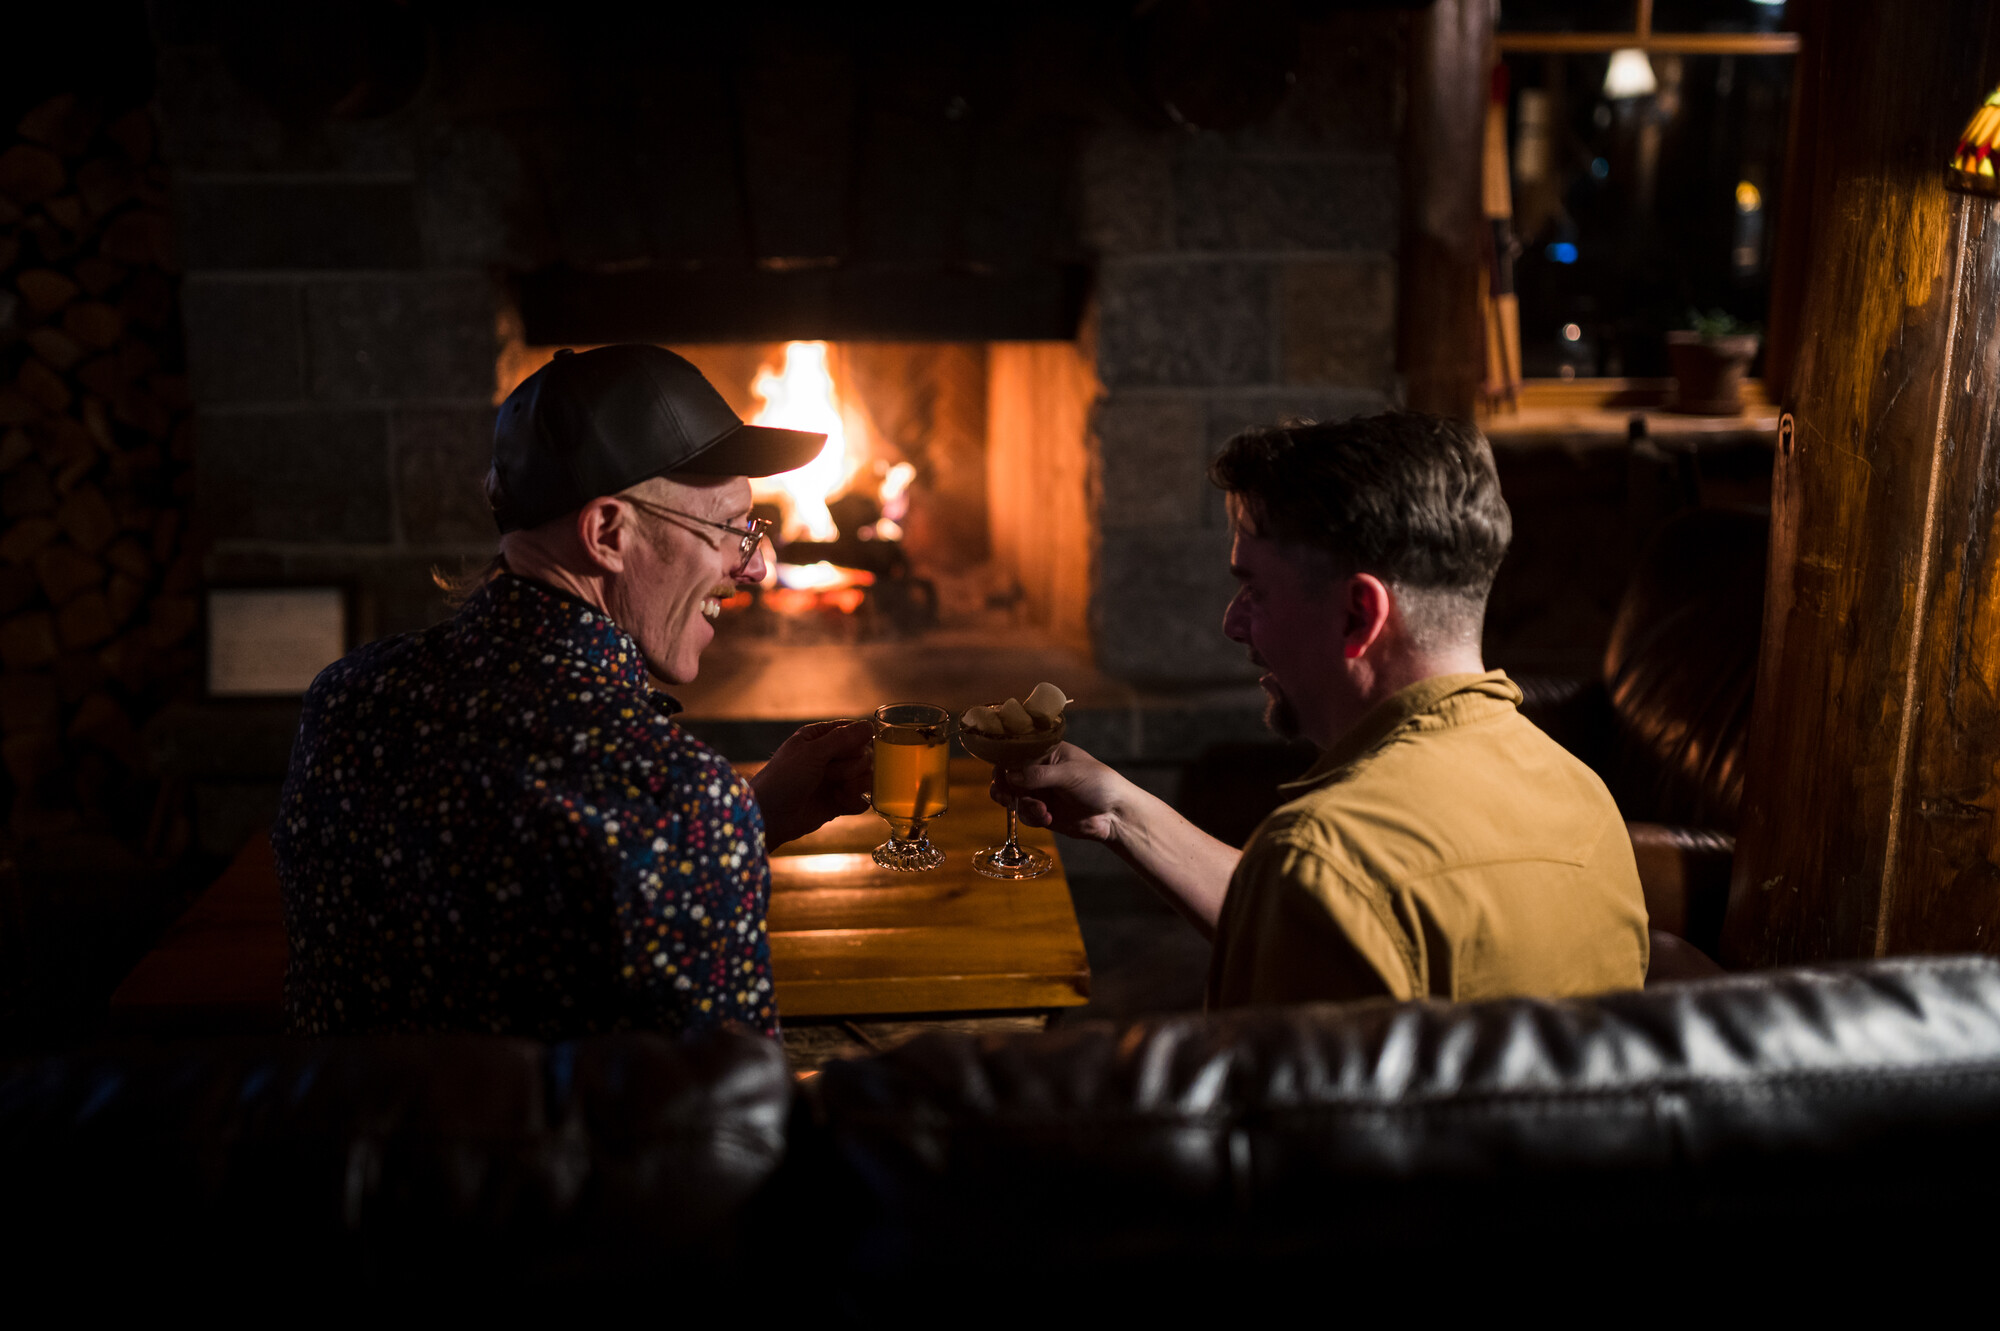 Two men cozy up by the fire with drinks in a dimly lit restaurant.